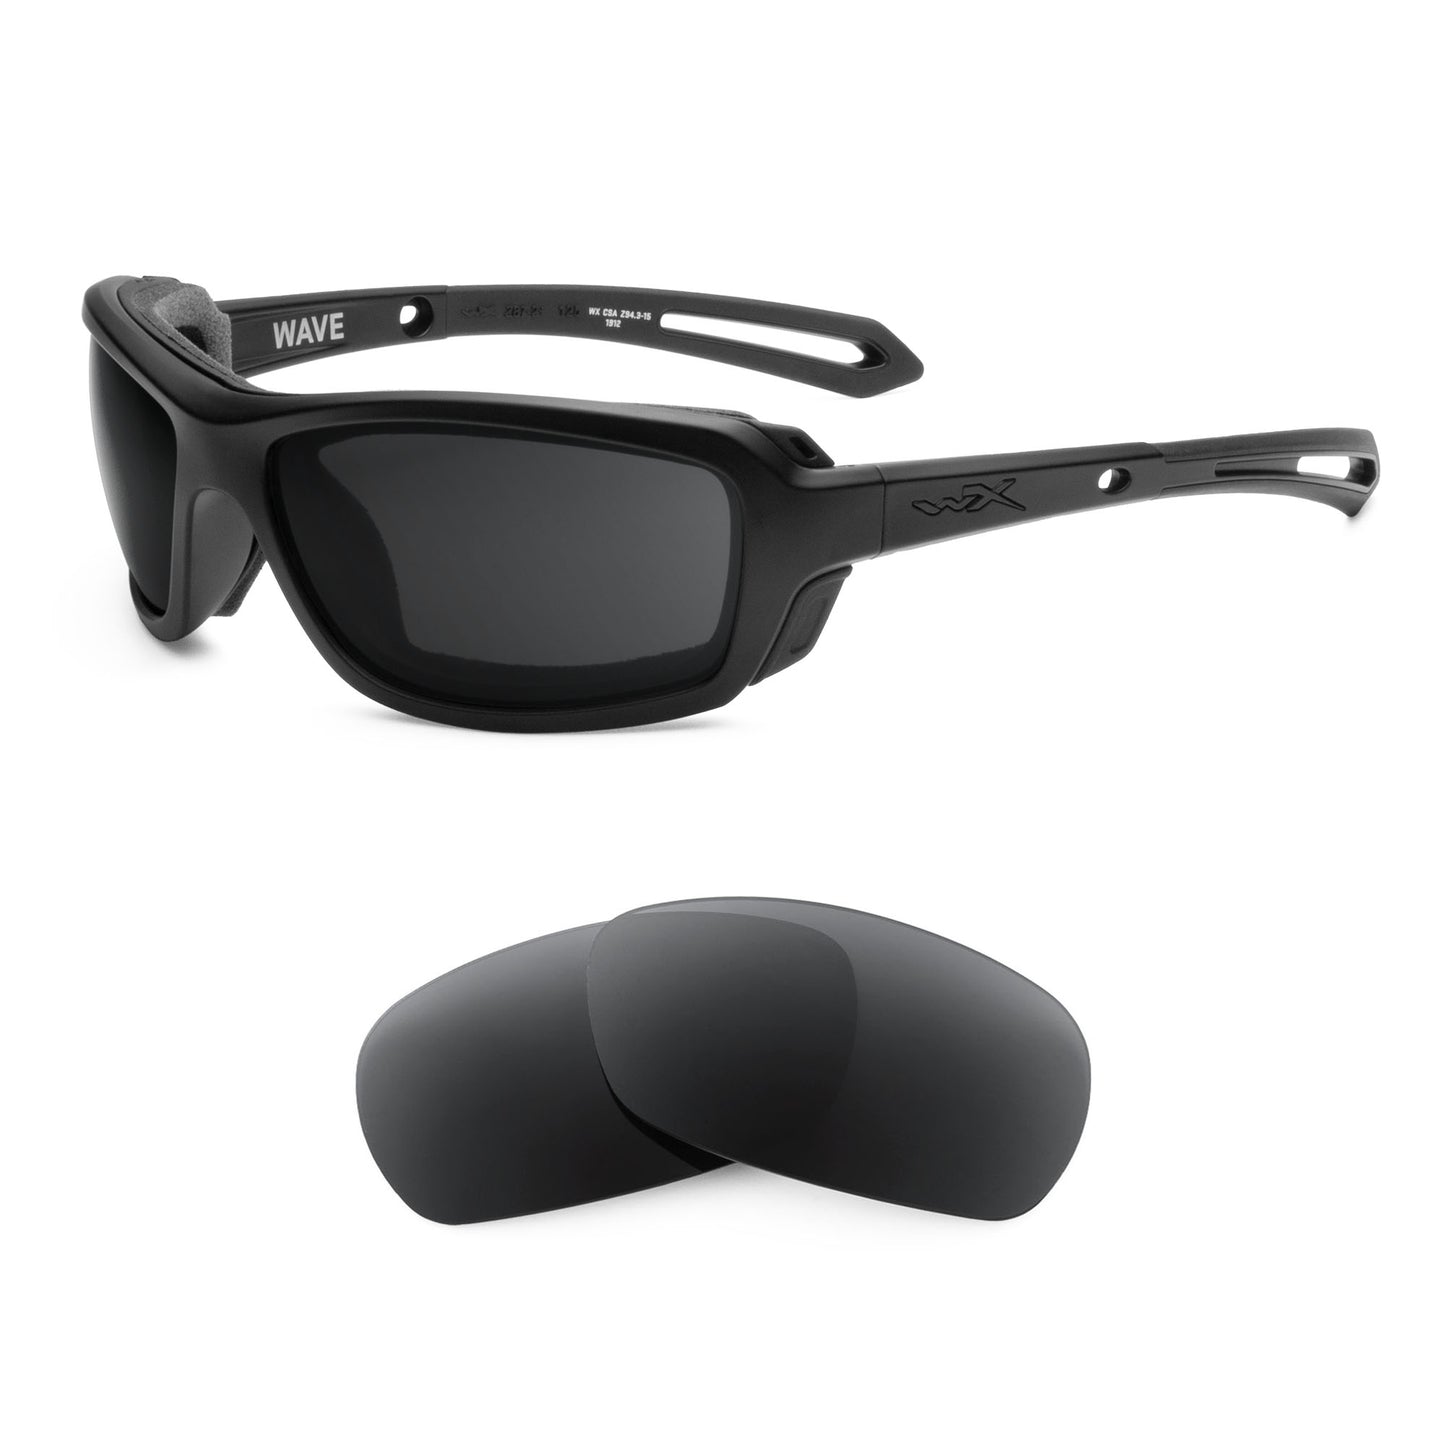 Wiley X Wave sunglasses with replacement lenses